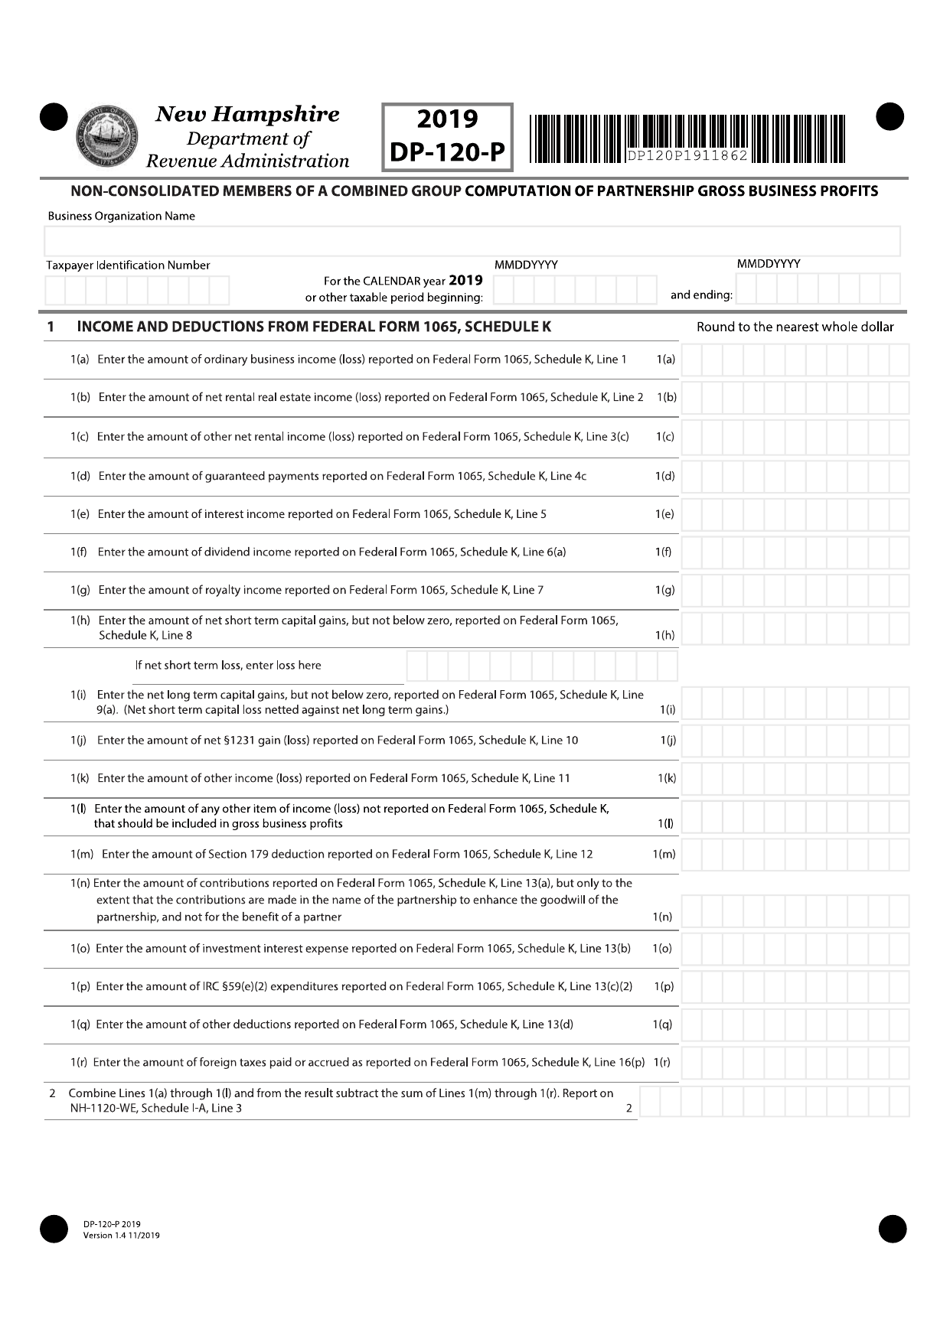 Form DP-120-P Non-consolidated Members of a Combined Group Computation of Partnership Gross Business Profits - New Hampshire, Page 1